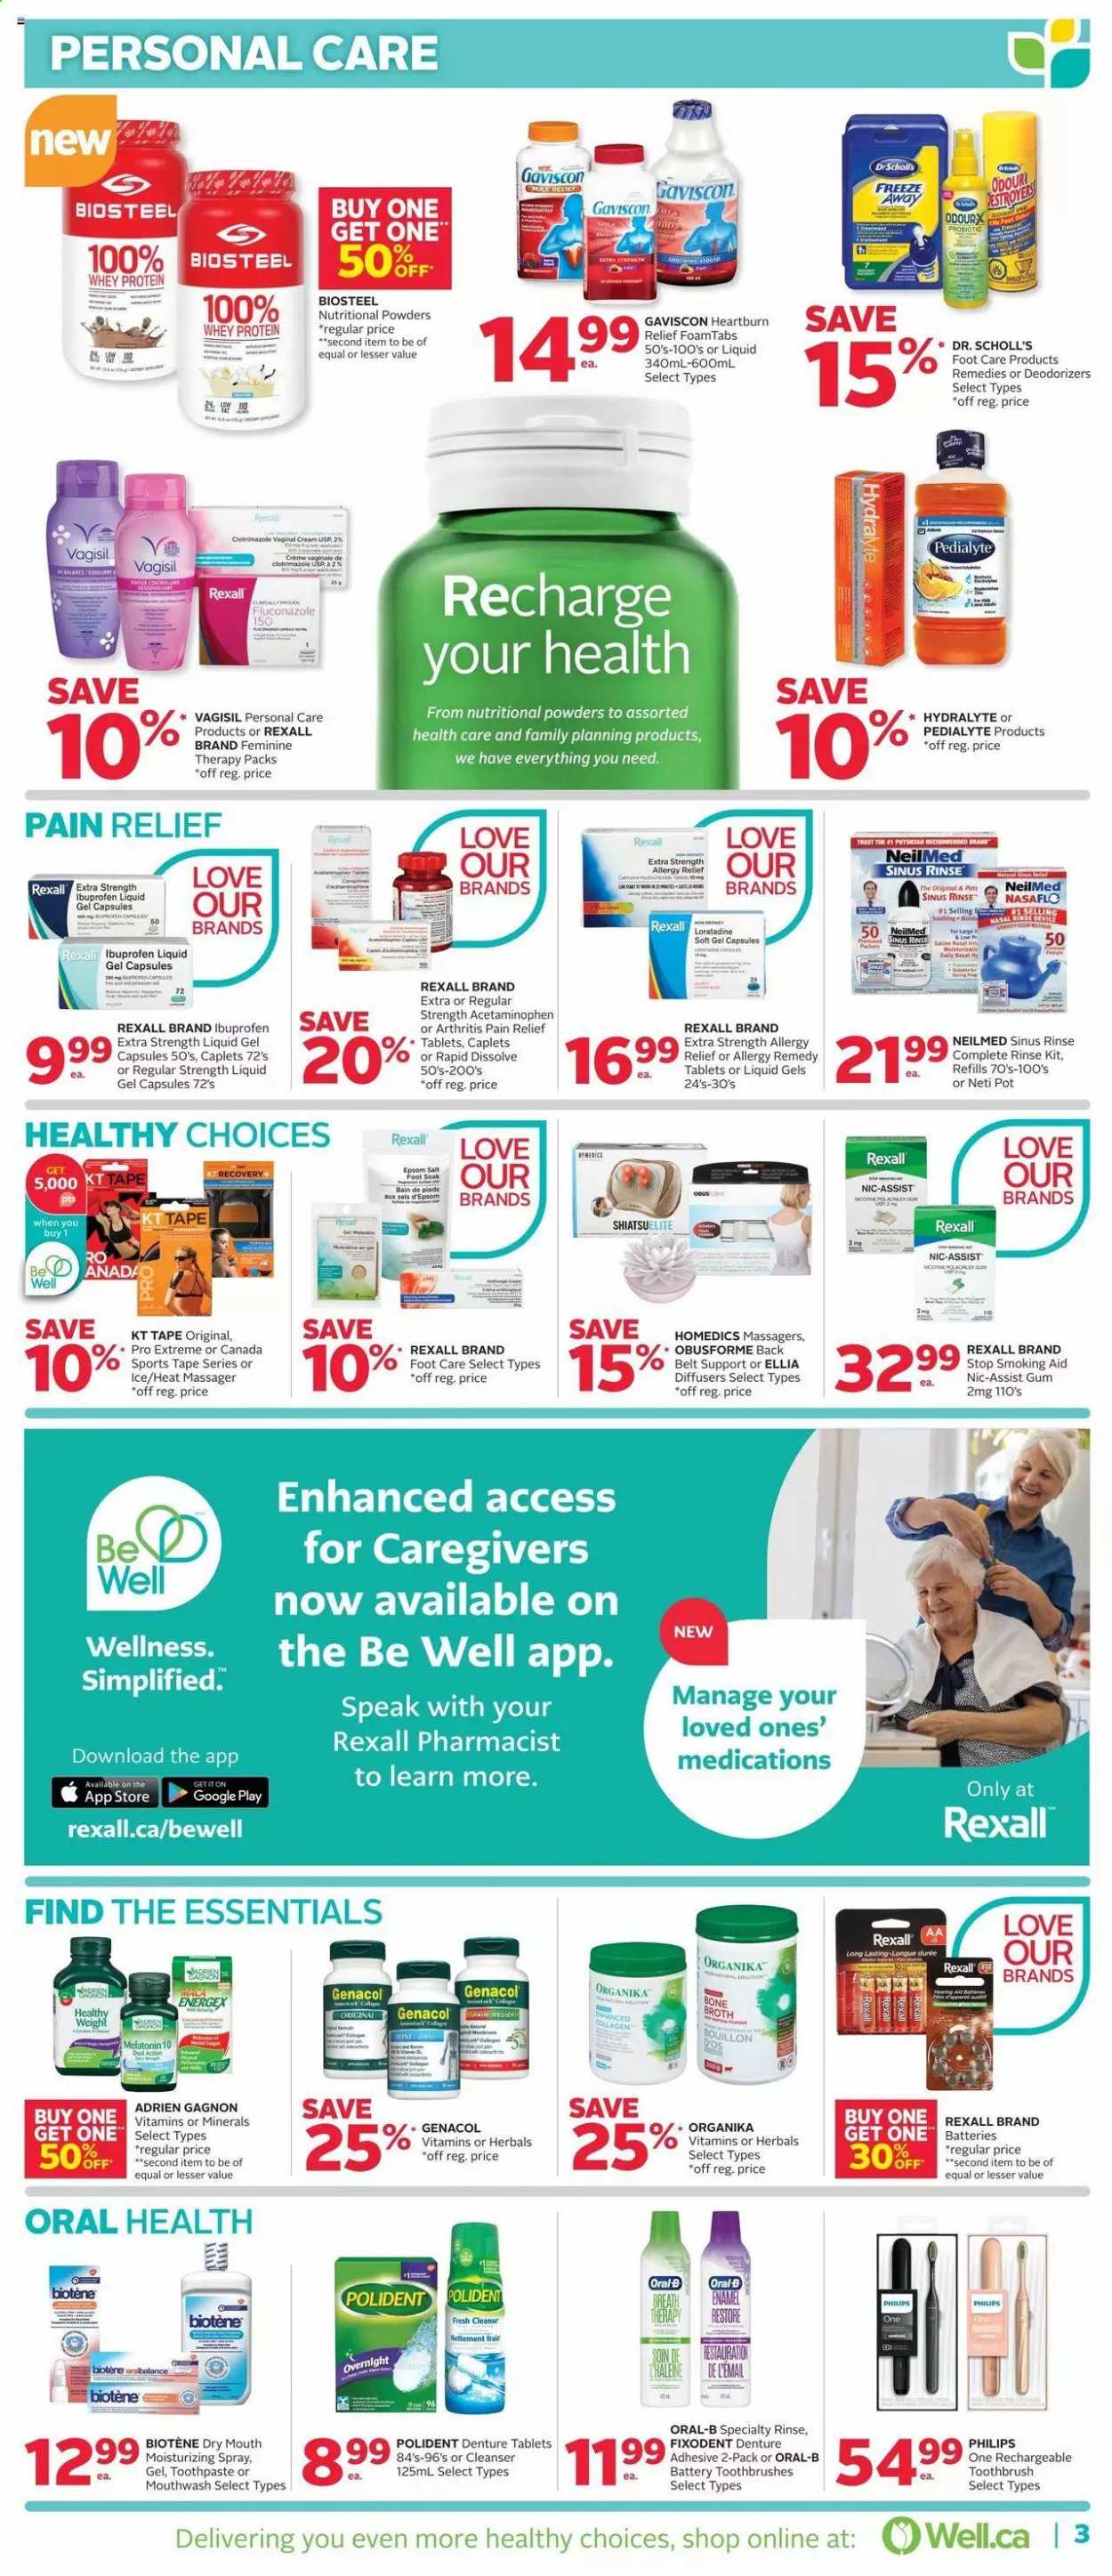 thumbnail - Rexall Flyer - July 16, 2021 - July 22, 2021 - Sales products - bouillon, broth, Biotene, toothbrush, toothpaste, mouthwash, Fixodent, Polident, cleanser, foot care, pot, diffuser, pain relief, Melatonin, Ibuprofen, whey protein, Gaviscon, Dr. Scholl's, Oral-B. Page 3.